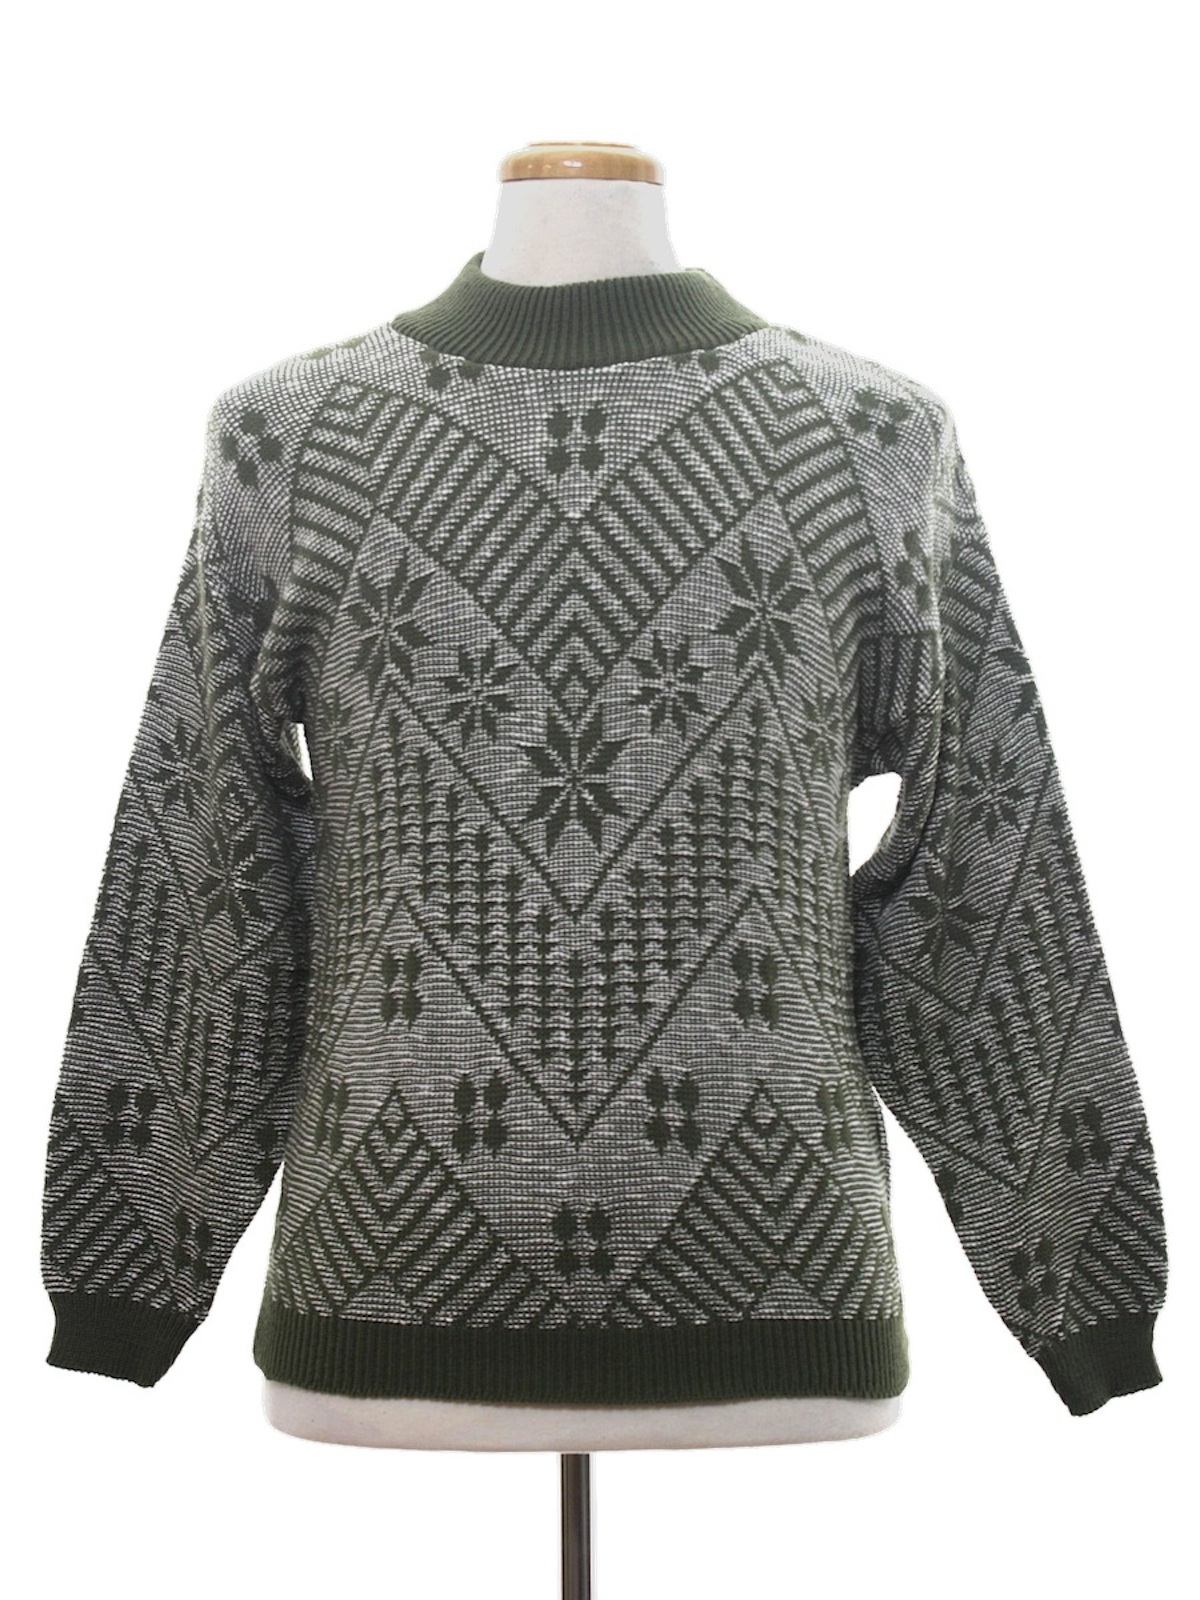 Vintage 70s Sweater: Late 70s or early 80s authentic vintage -Imperial ...